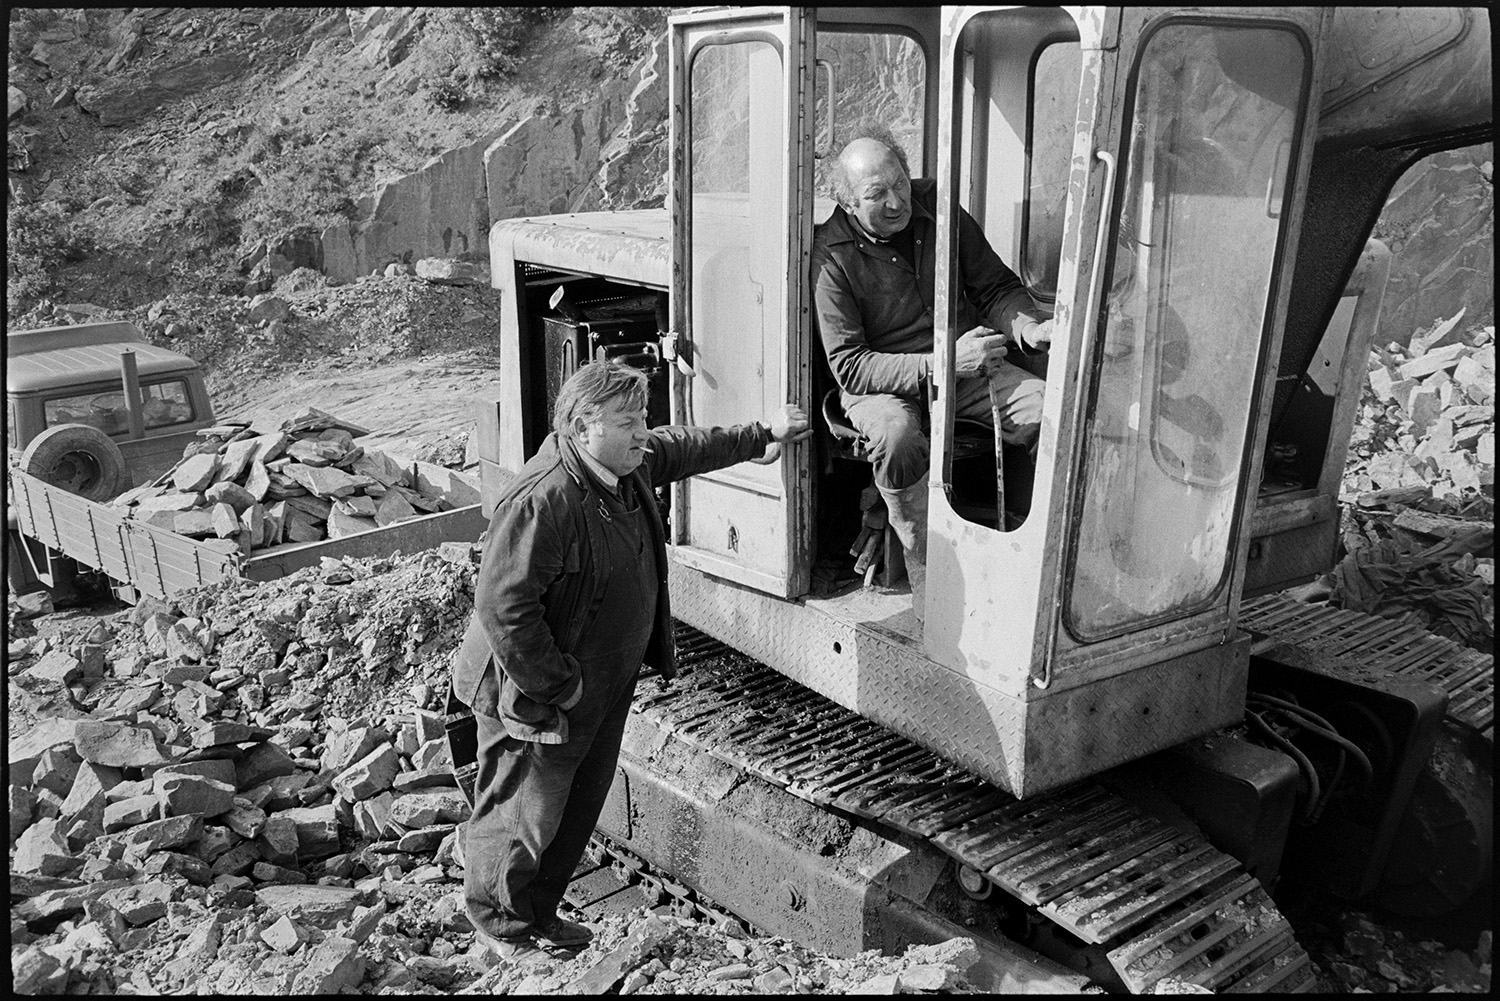 Men using mechanical shovel in quarry, excavator.
[Dennis Harris and Harold Glover working with an excavator at Newbridge Quarry, Dolton. Dennis Harris is leaning against the digger while Harold Glover is sat in the cab working the machine. A lorry loaded with stone is visible in the background.]